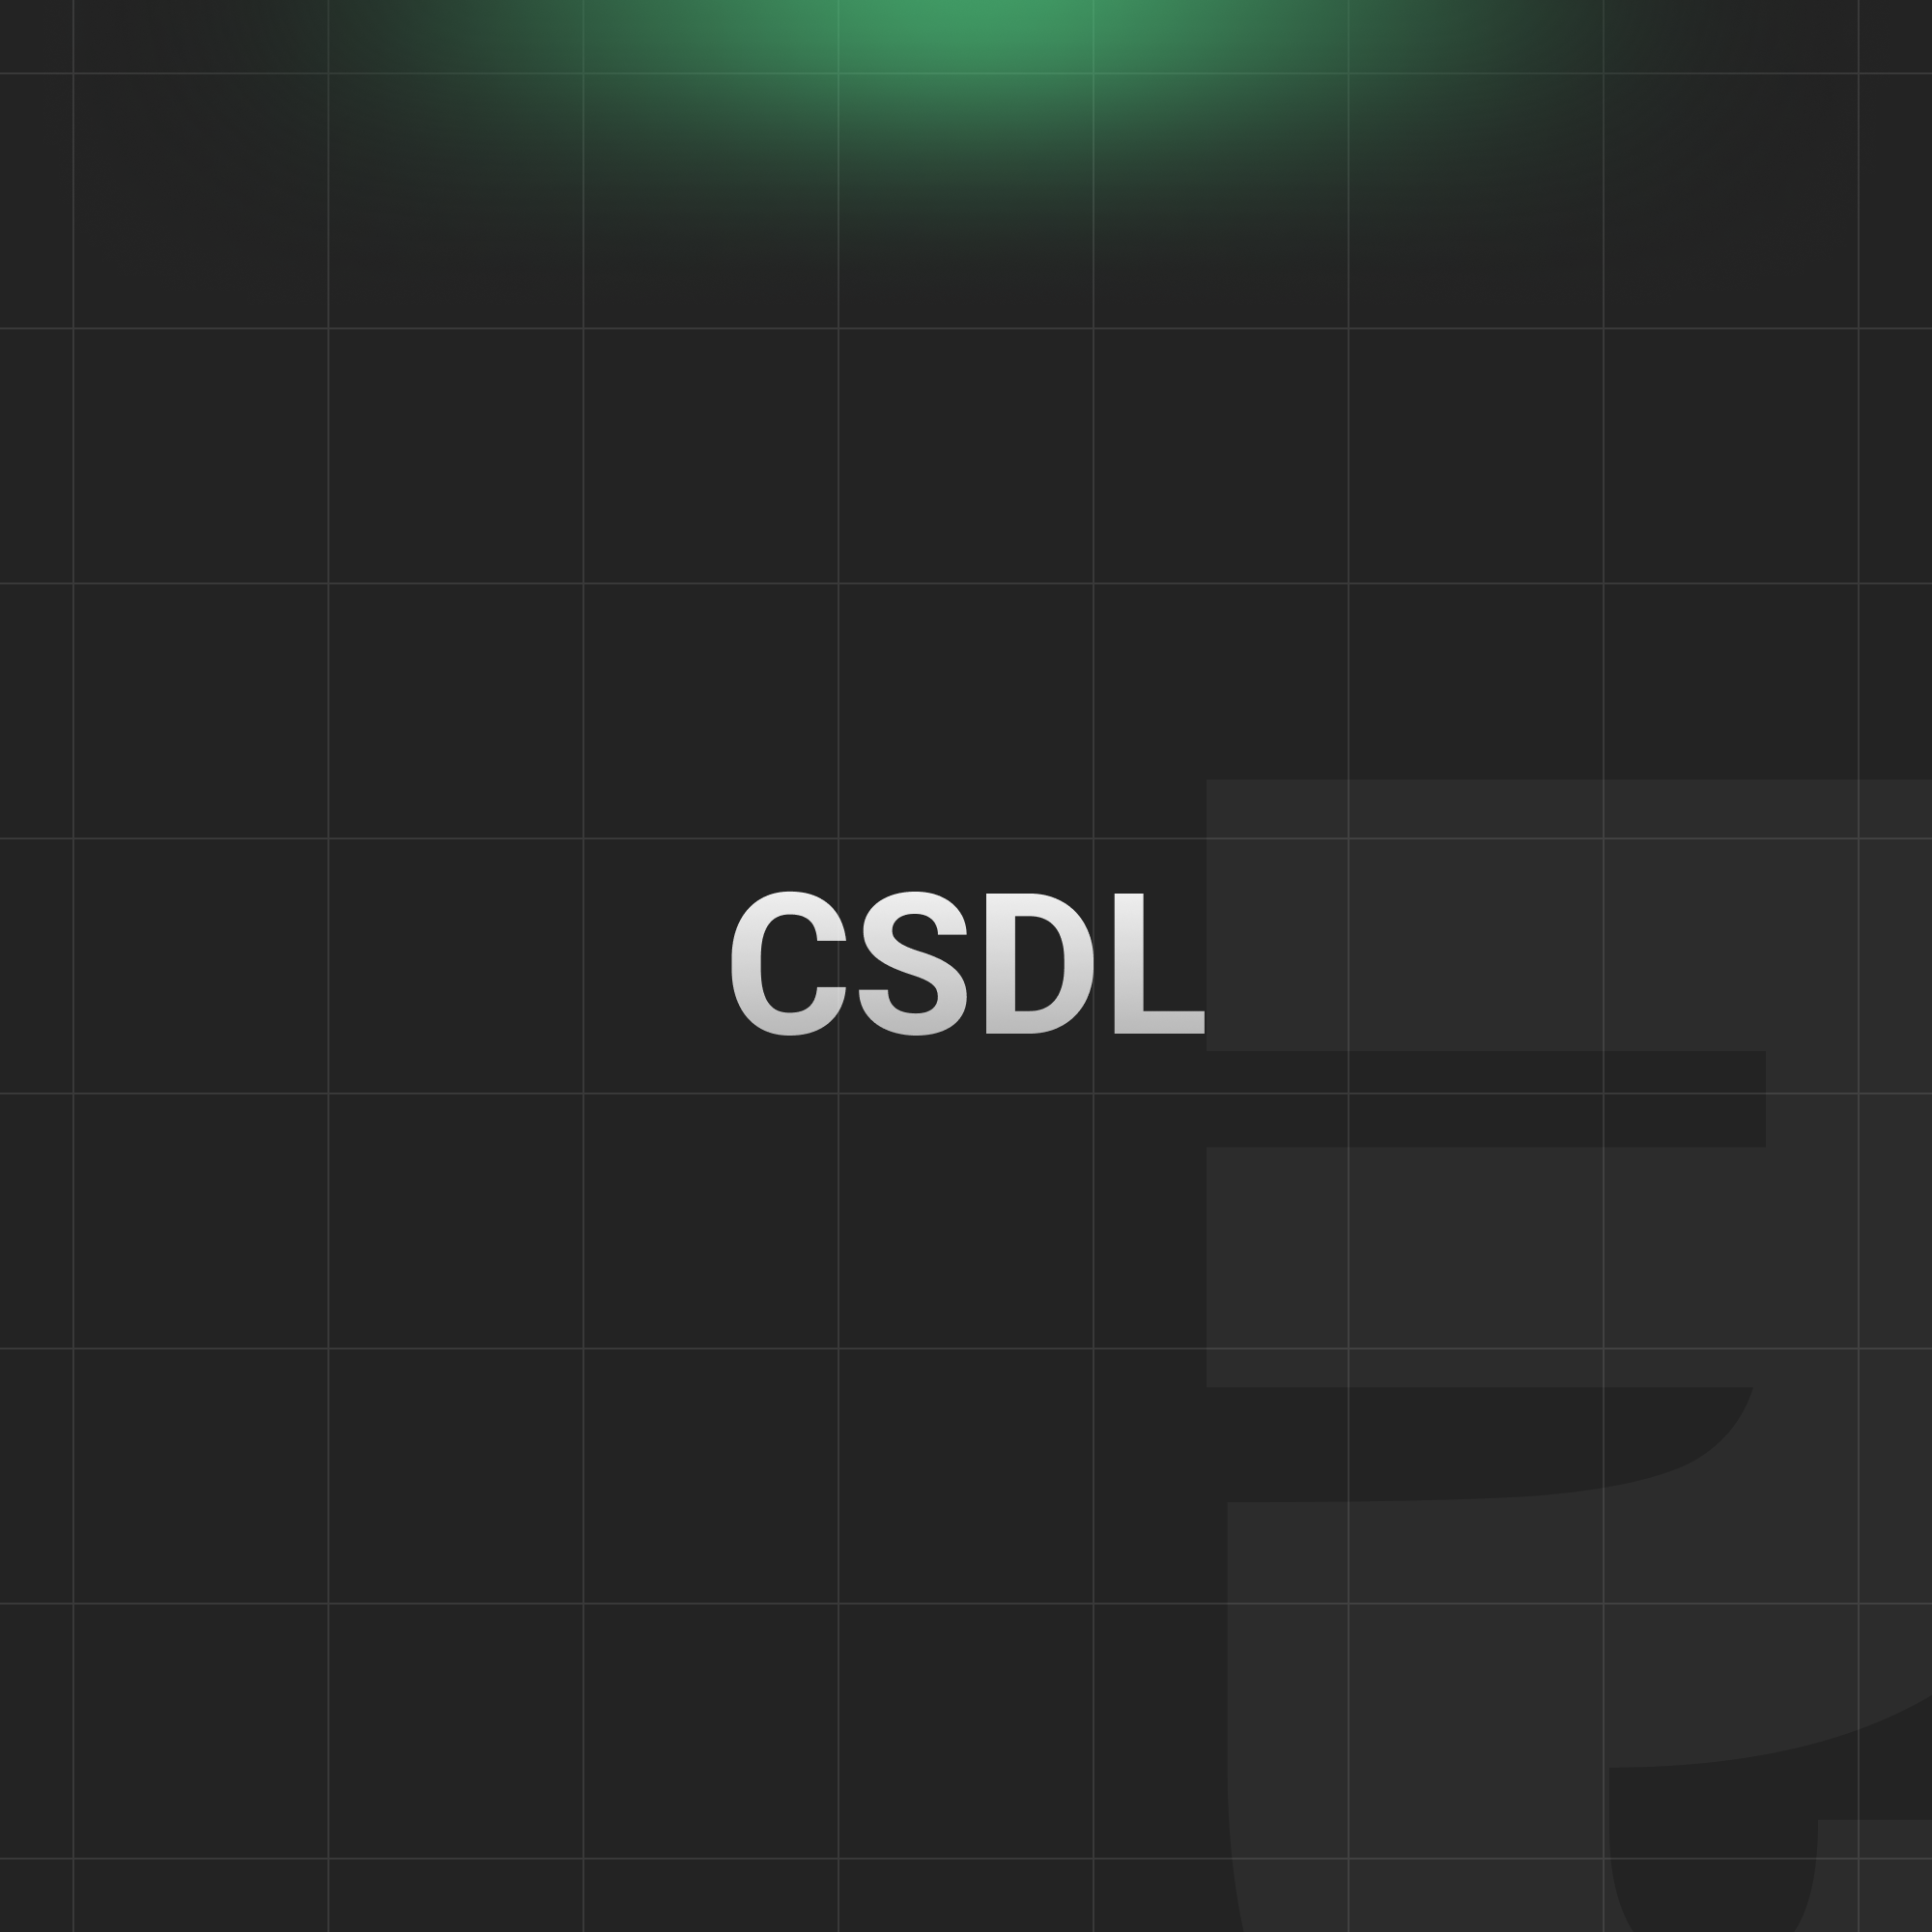 CDSL - Central Depository Services Limited and it's role